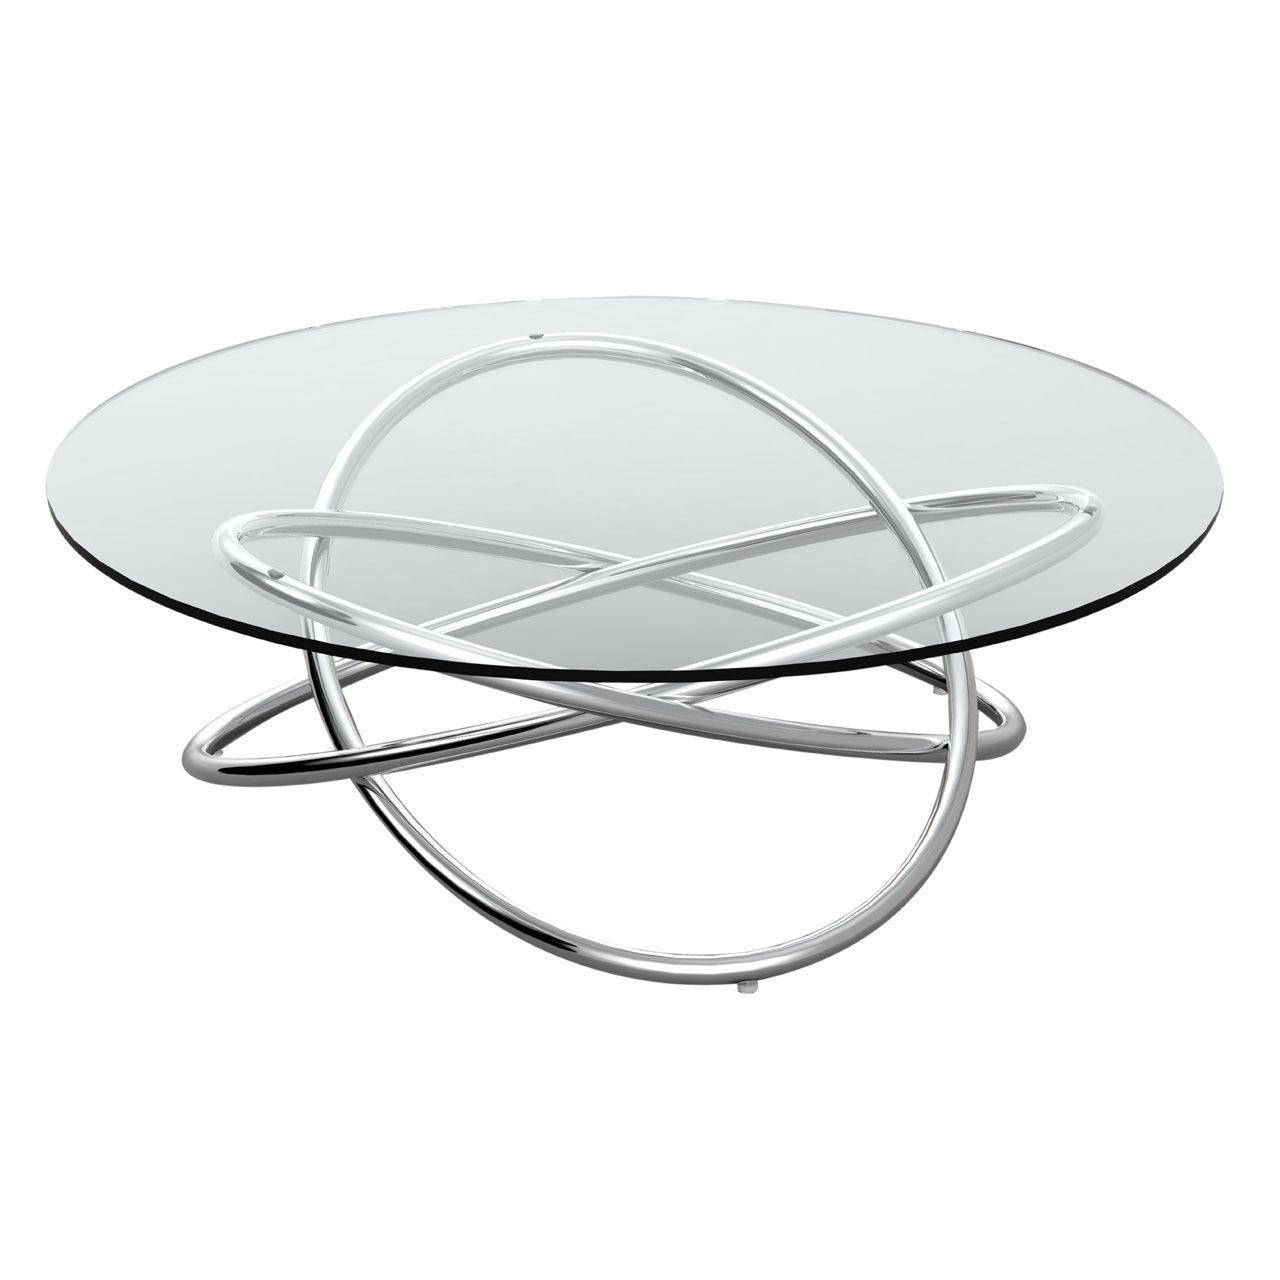 Round Glass Coffee Table, Glass Coffee Table With Regard To 2019 Silver Stainless Steel Coffee Tables (View 4 of 20)